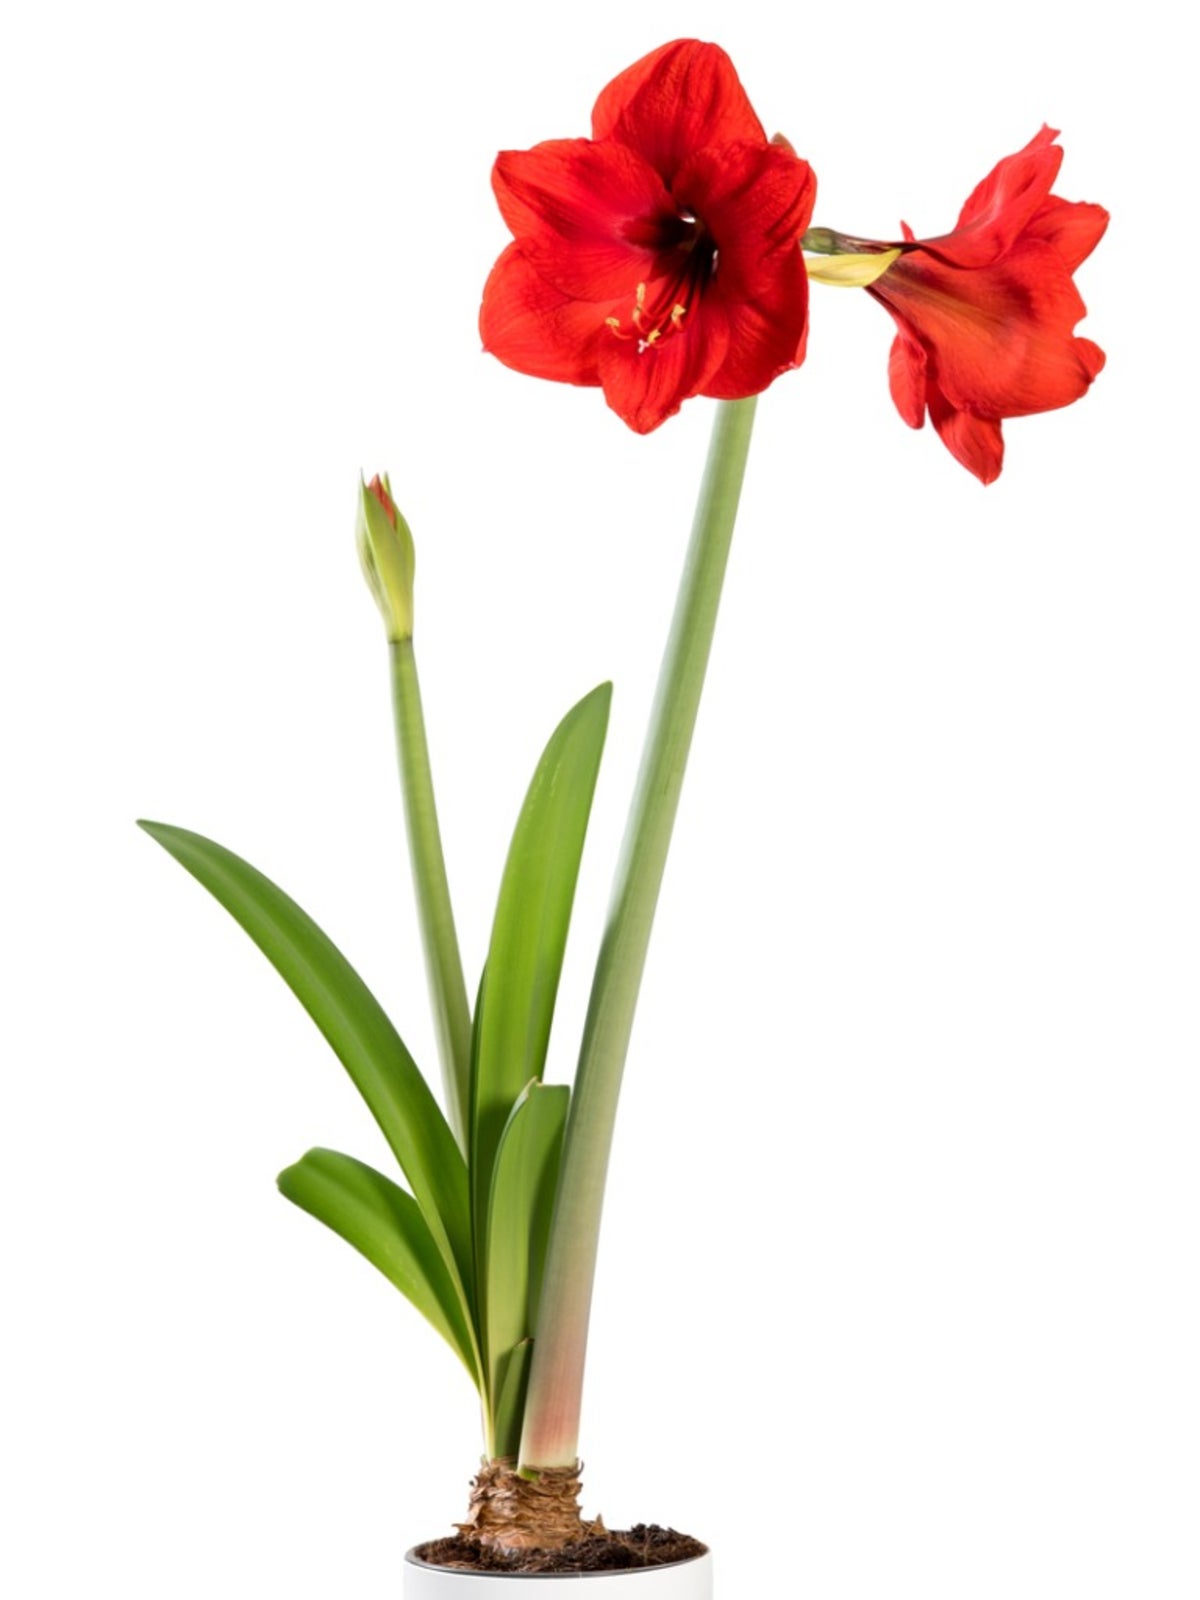 Do i have to chill amaryllis bulb before planting indoors